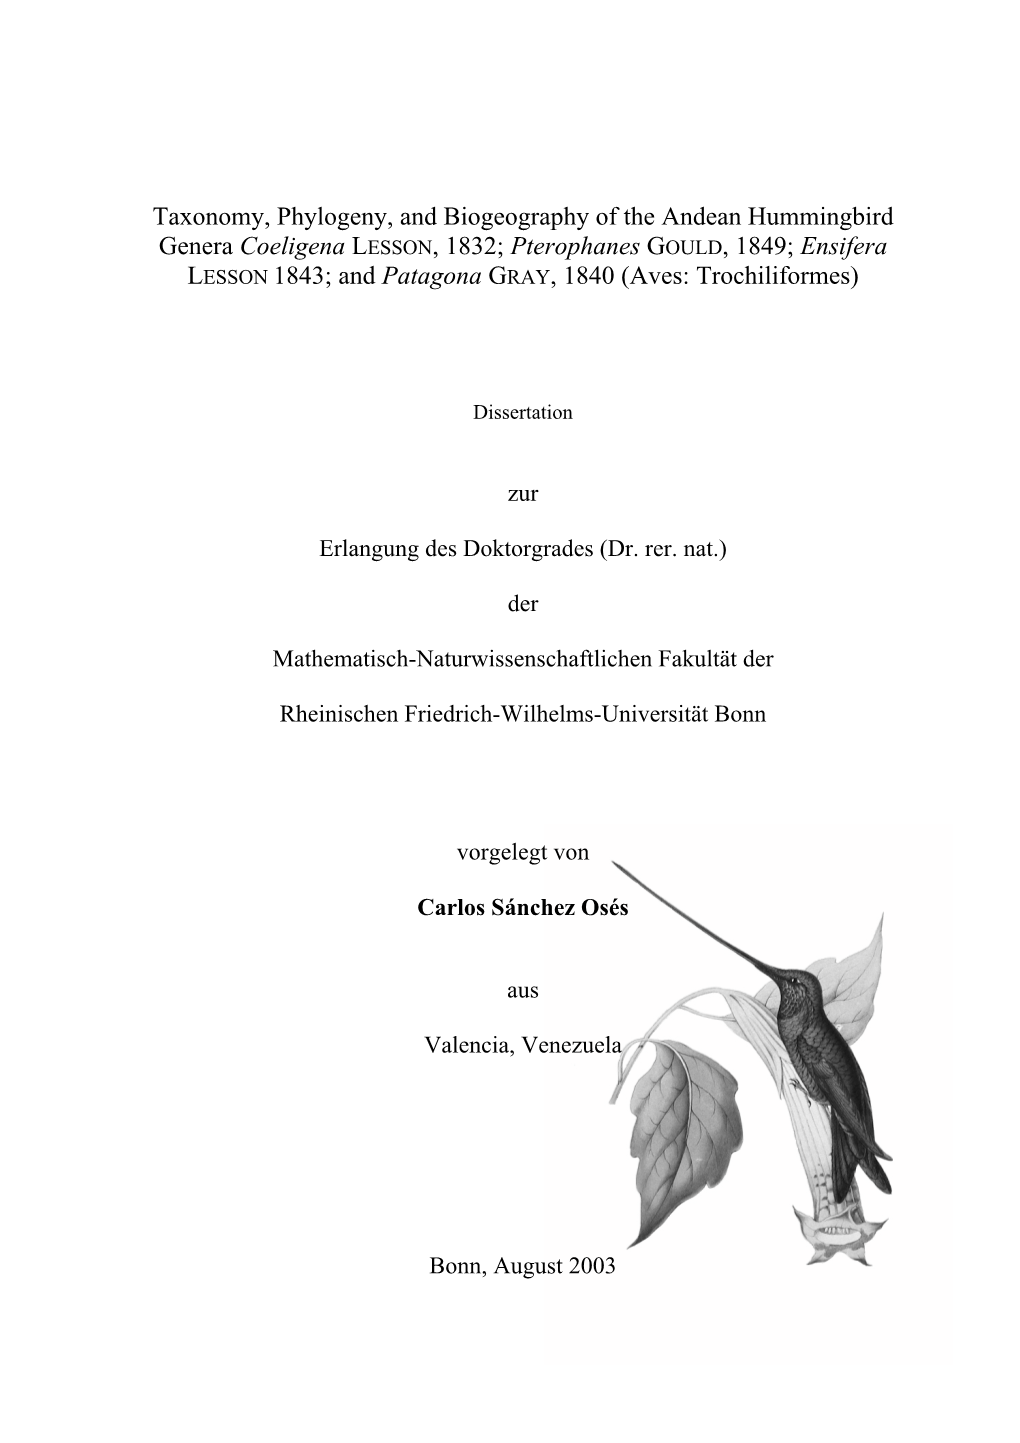 Pterophanes GOULD, 1849; Ensifera LESSON 1843; and Patagona GRAY, 1840 (Aves: Trochiliformes)